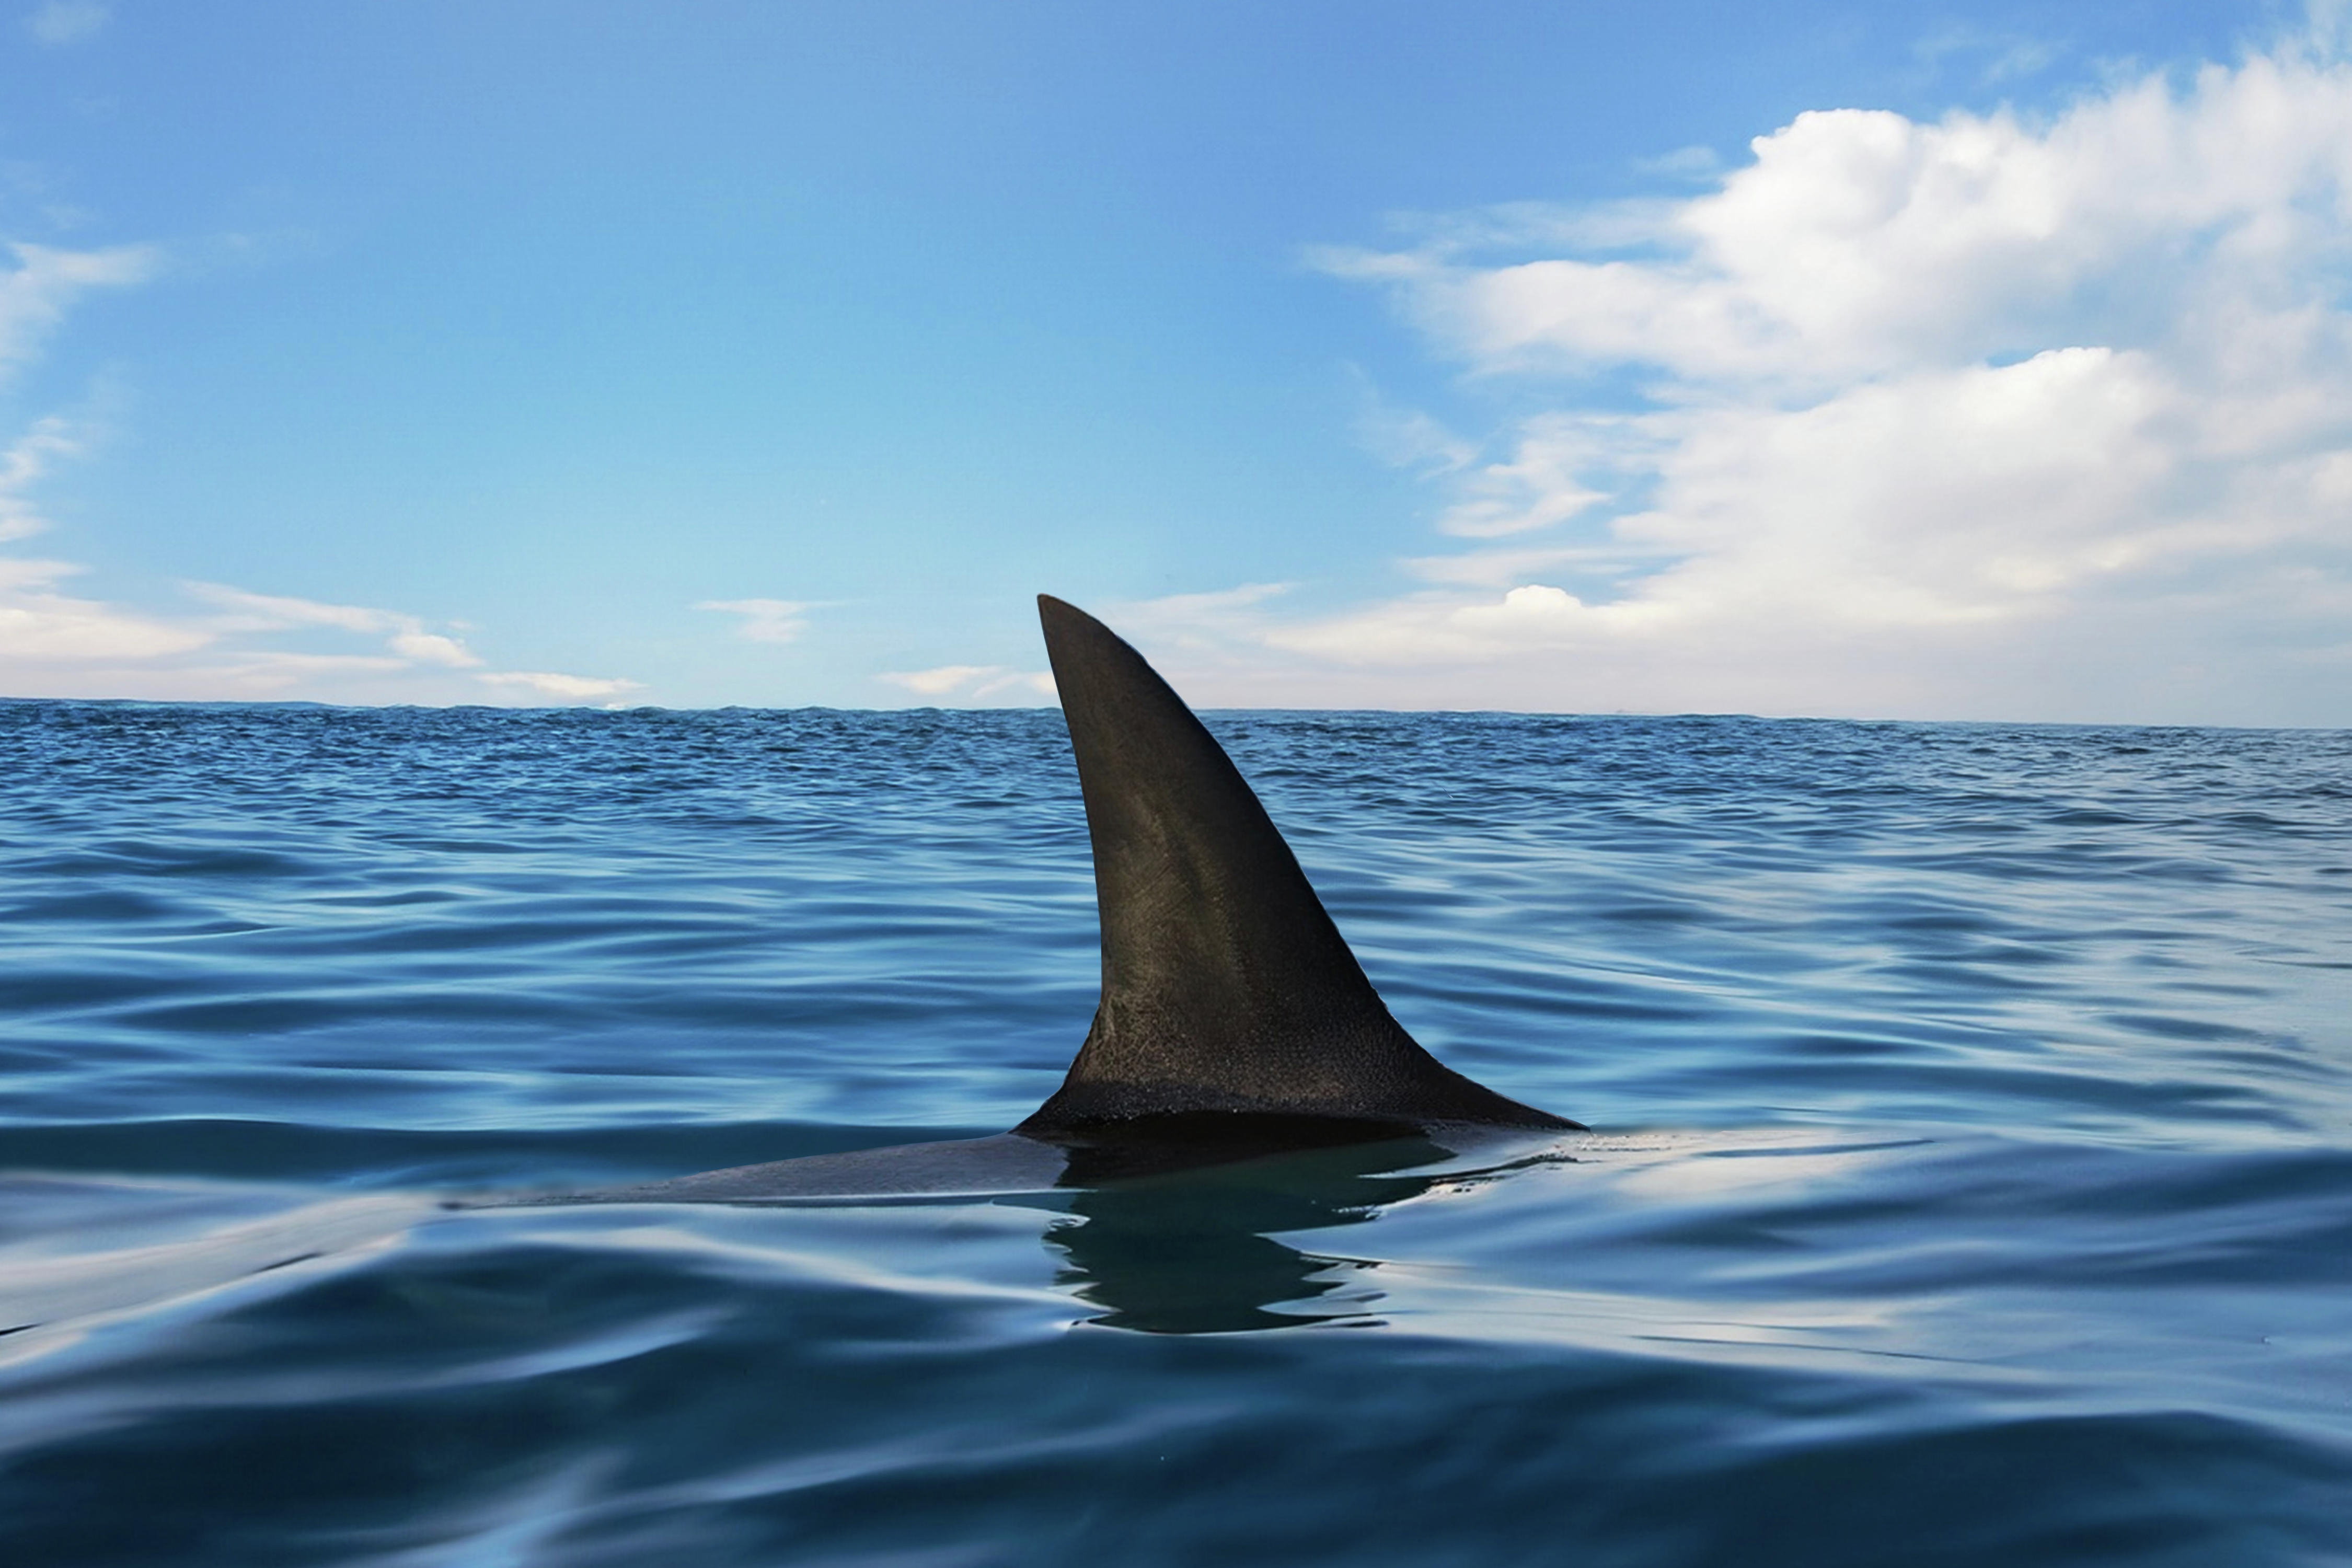 The great white isn't the only species of shark surveying the waters